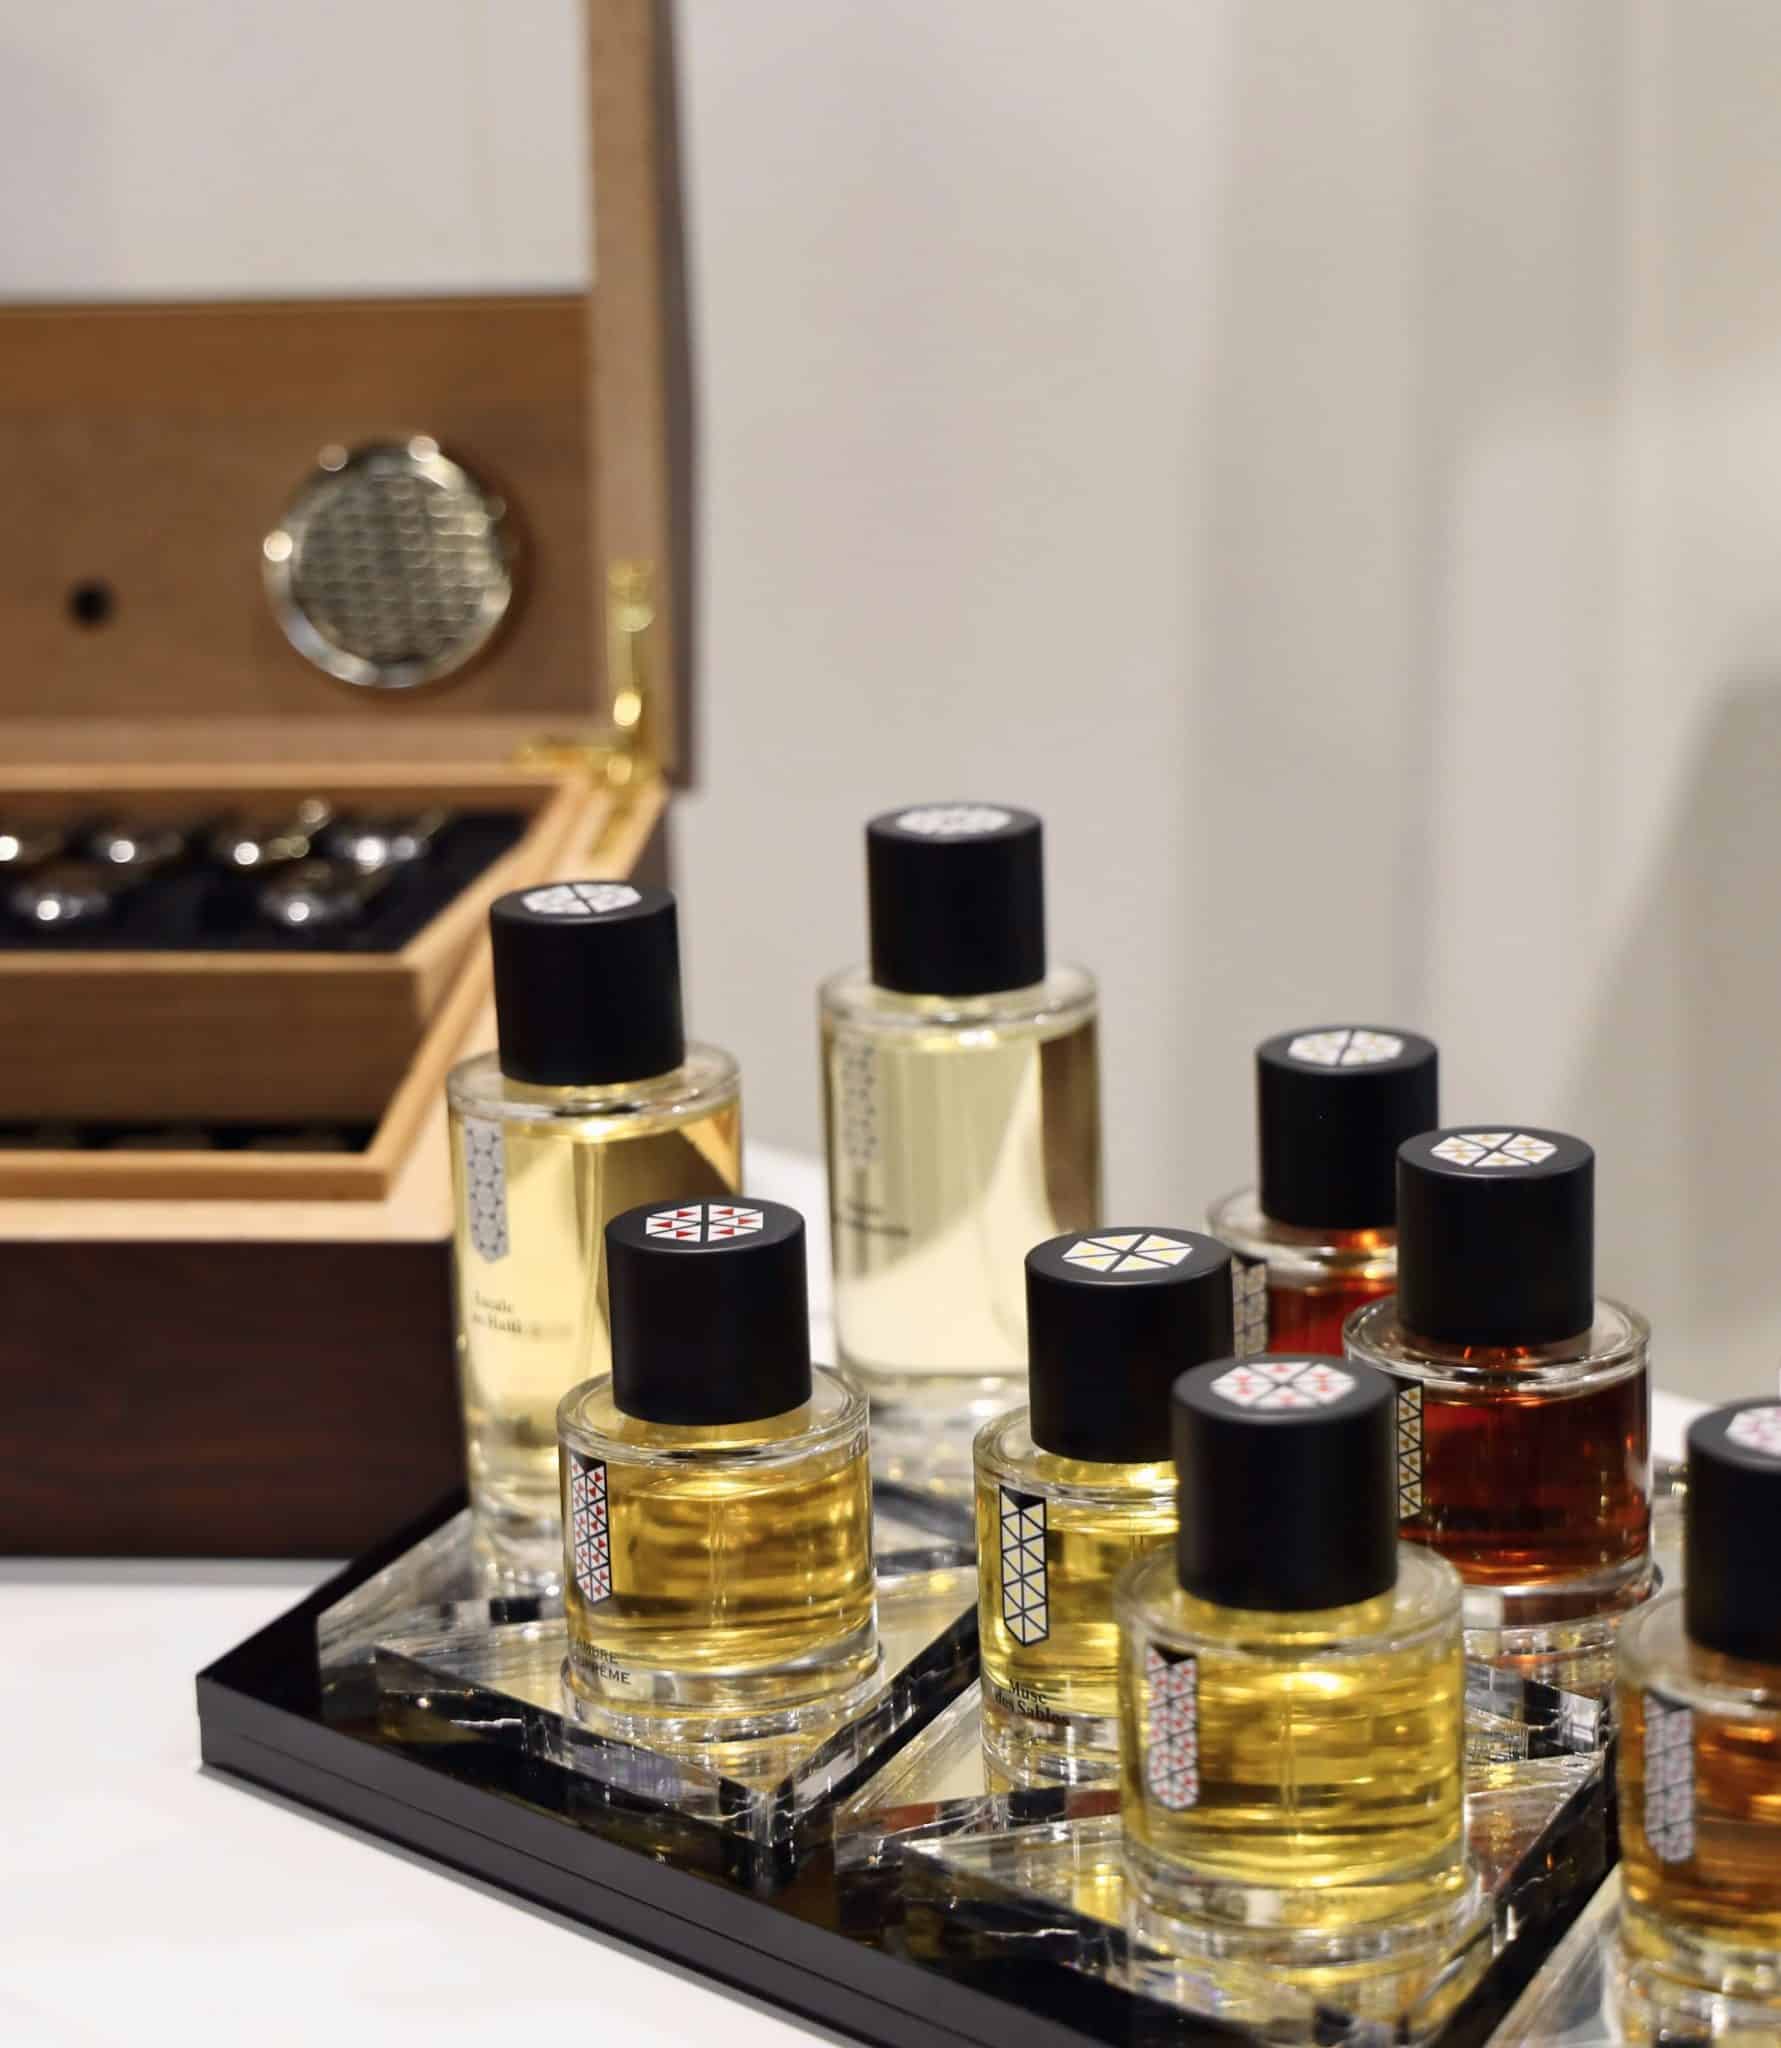 Getting Acquainted with Luxury Fragrances